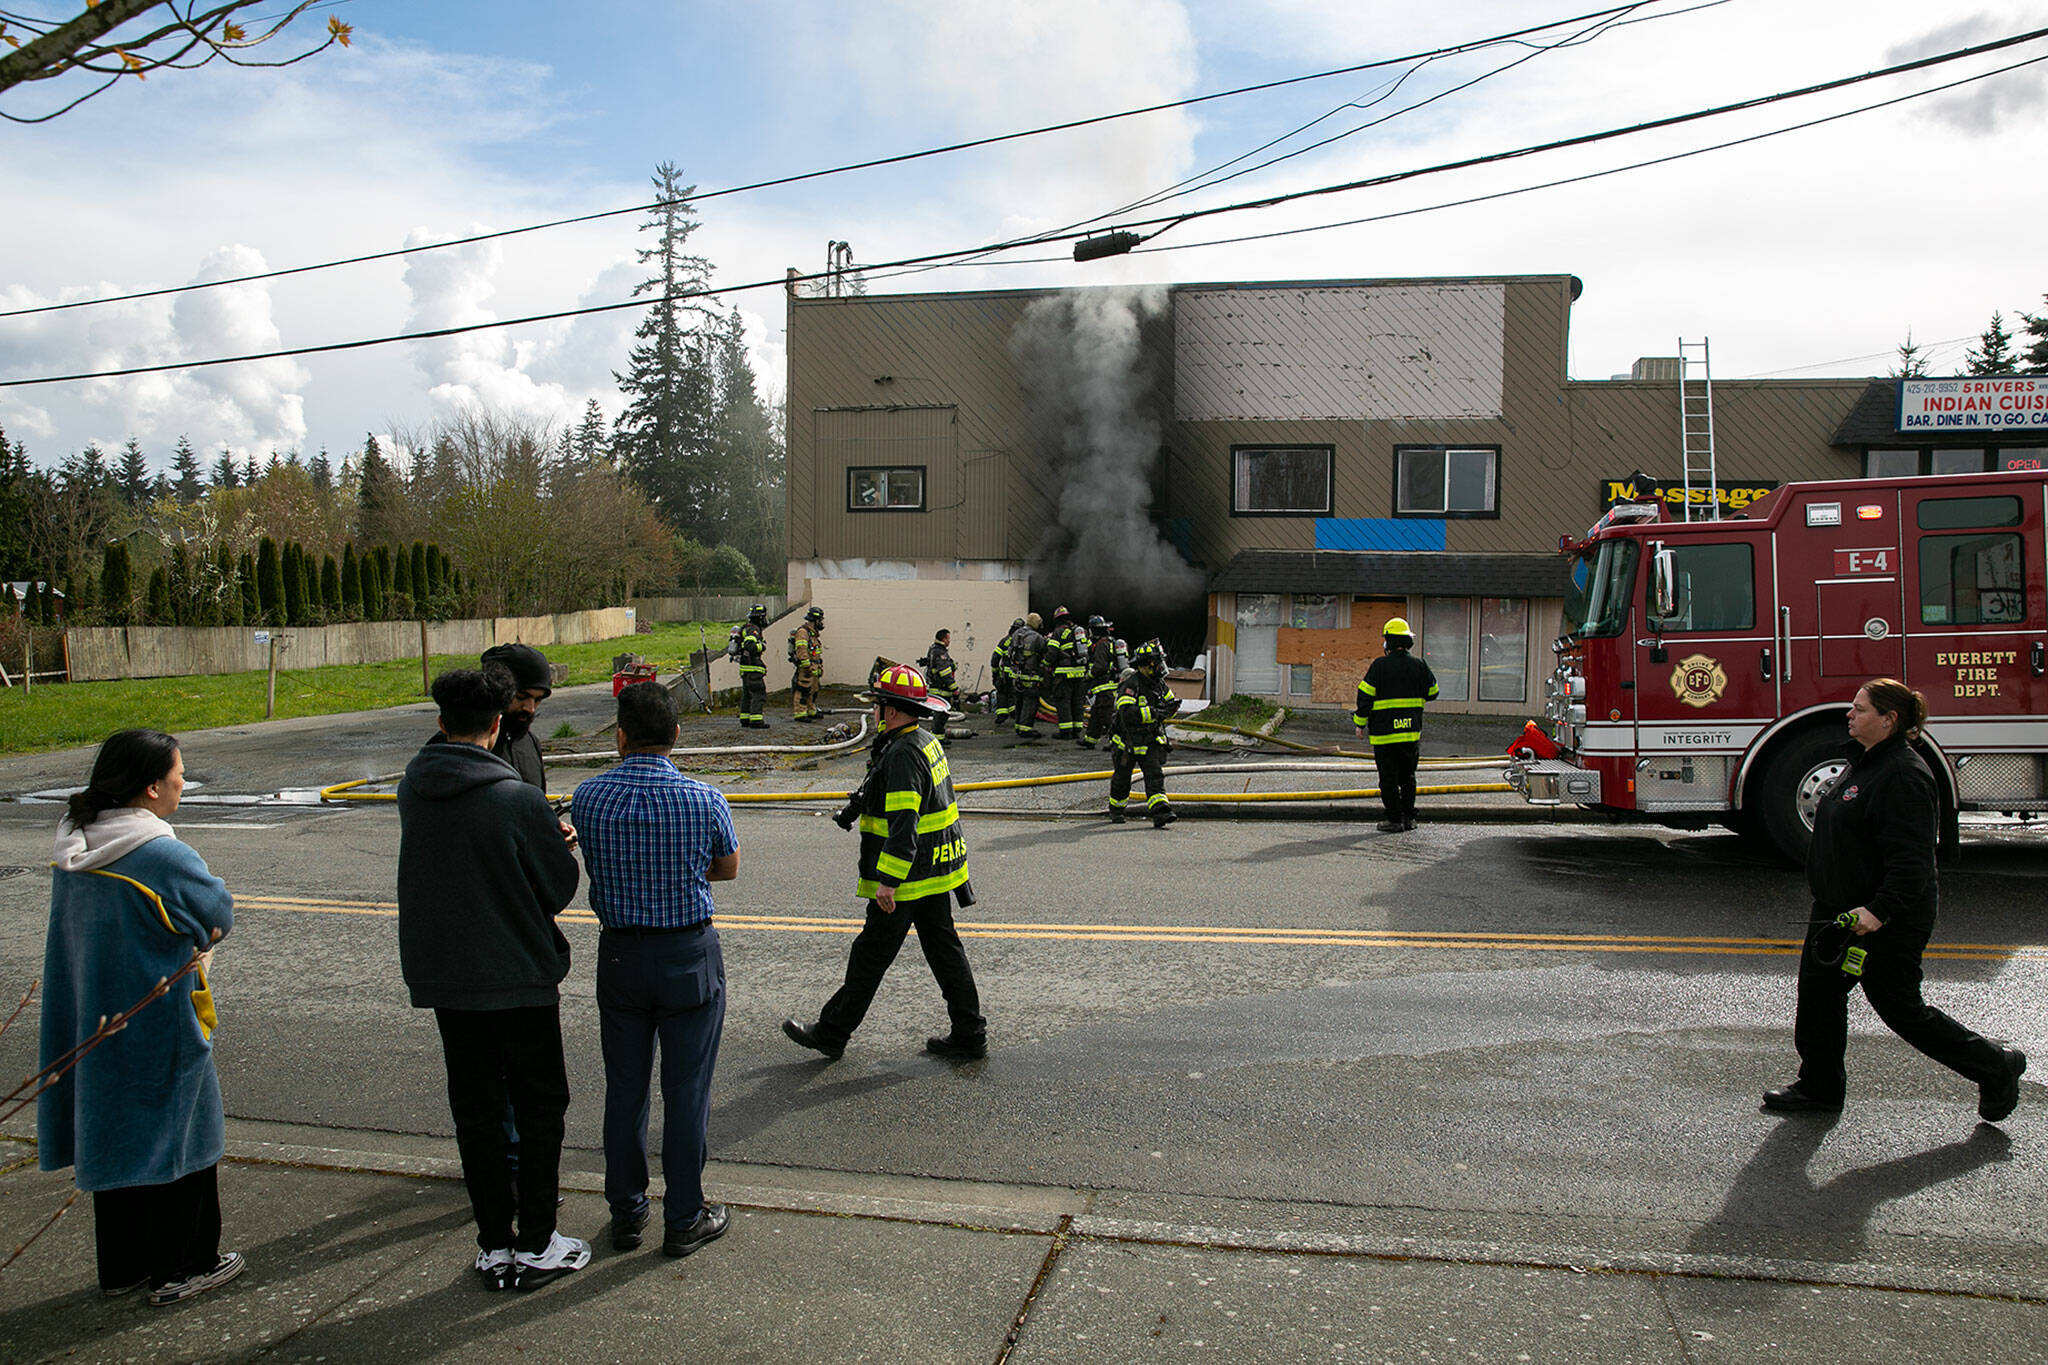 Employees from 5 Rivers Indian Cuisine and other businesses at 9629 Evergreen Way watch as smoke billows out of a lower level garage at the strip mall on Thursday in Everett. (Ryan Berry / The Herald)